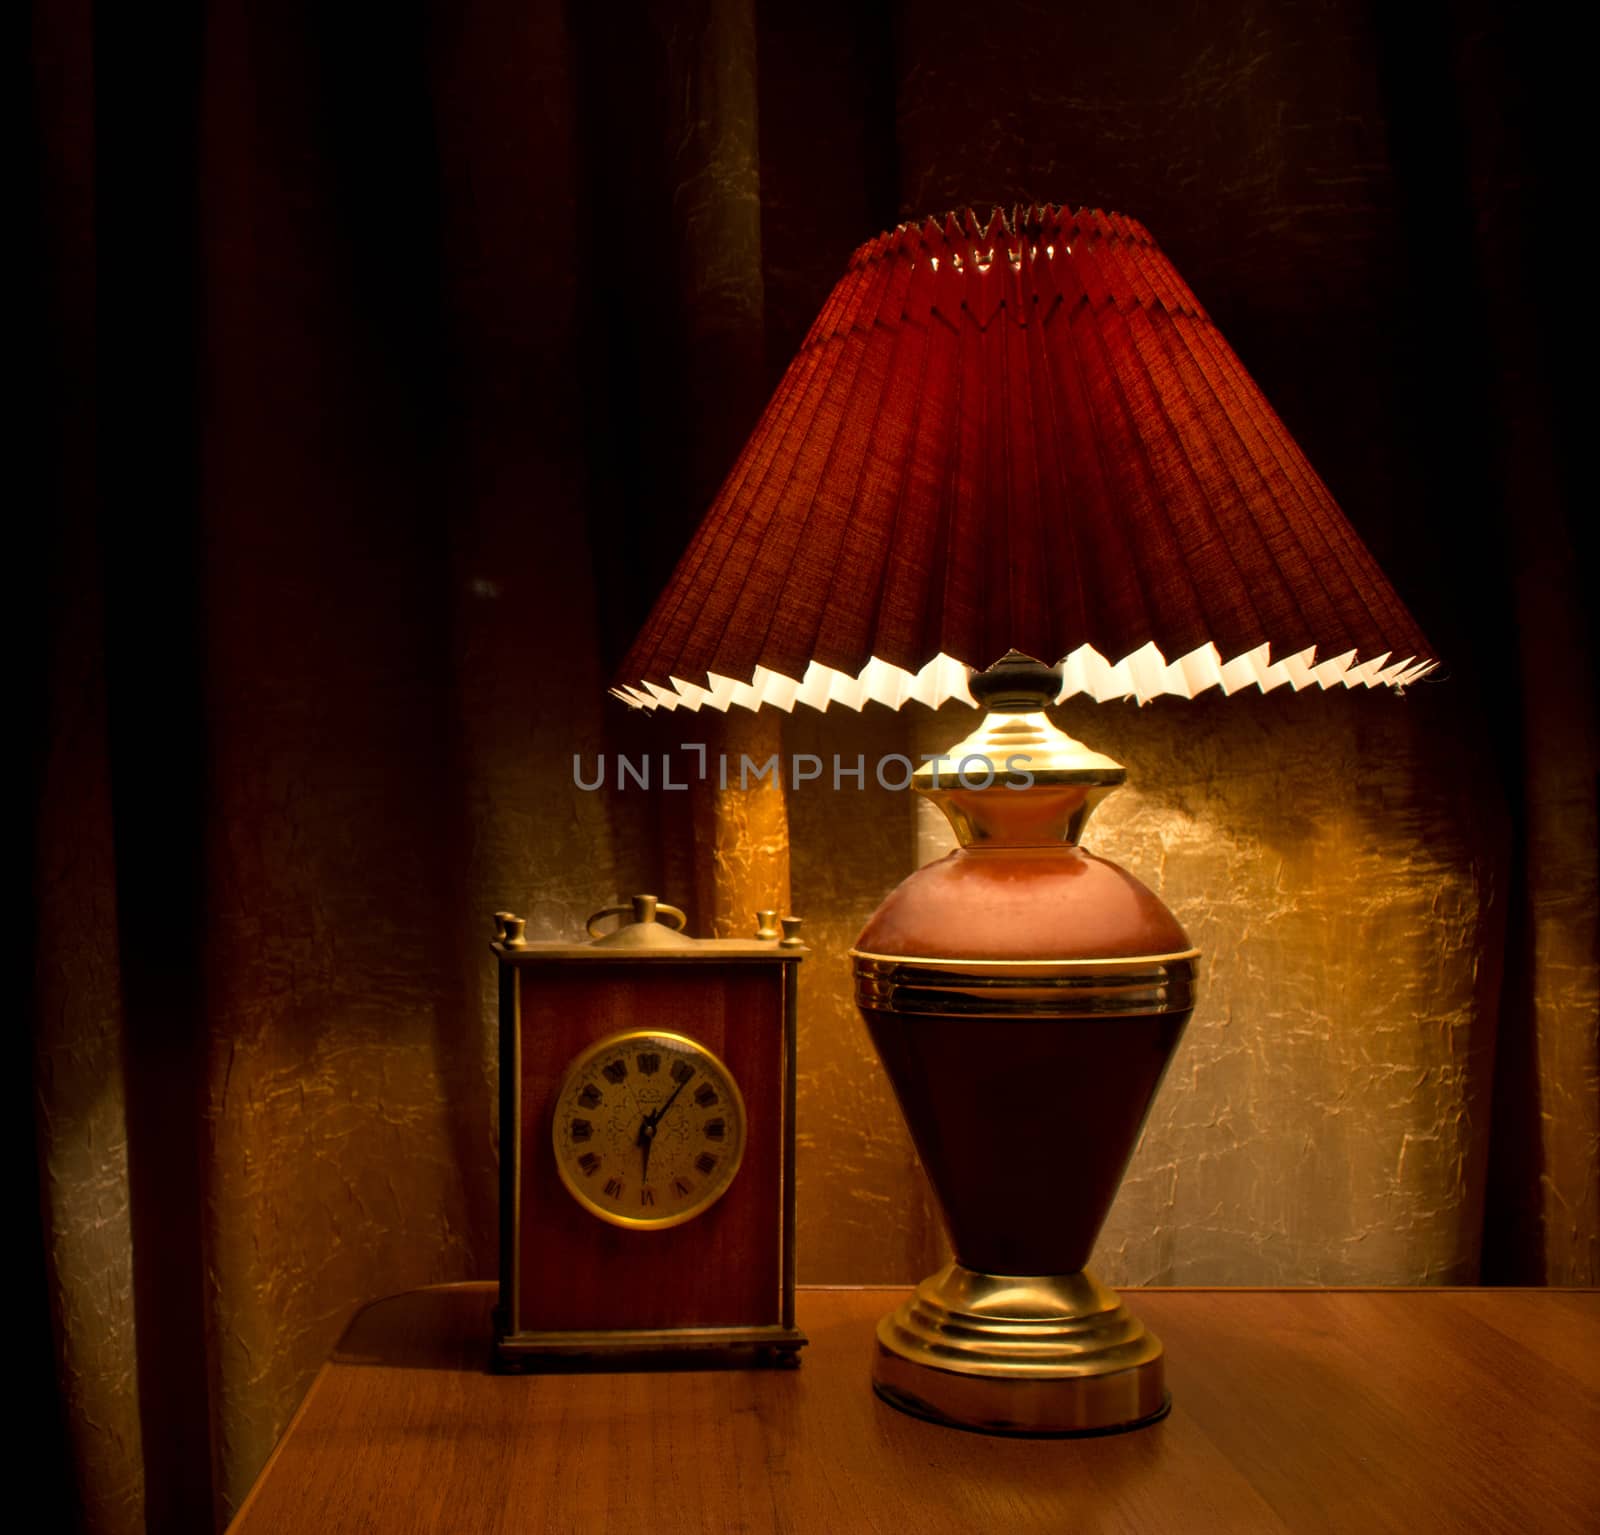 Old lamp and clock on the table